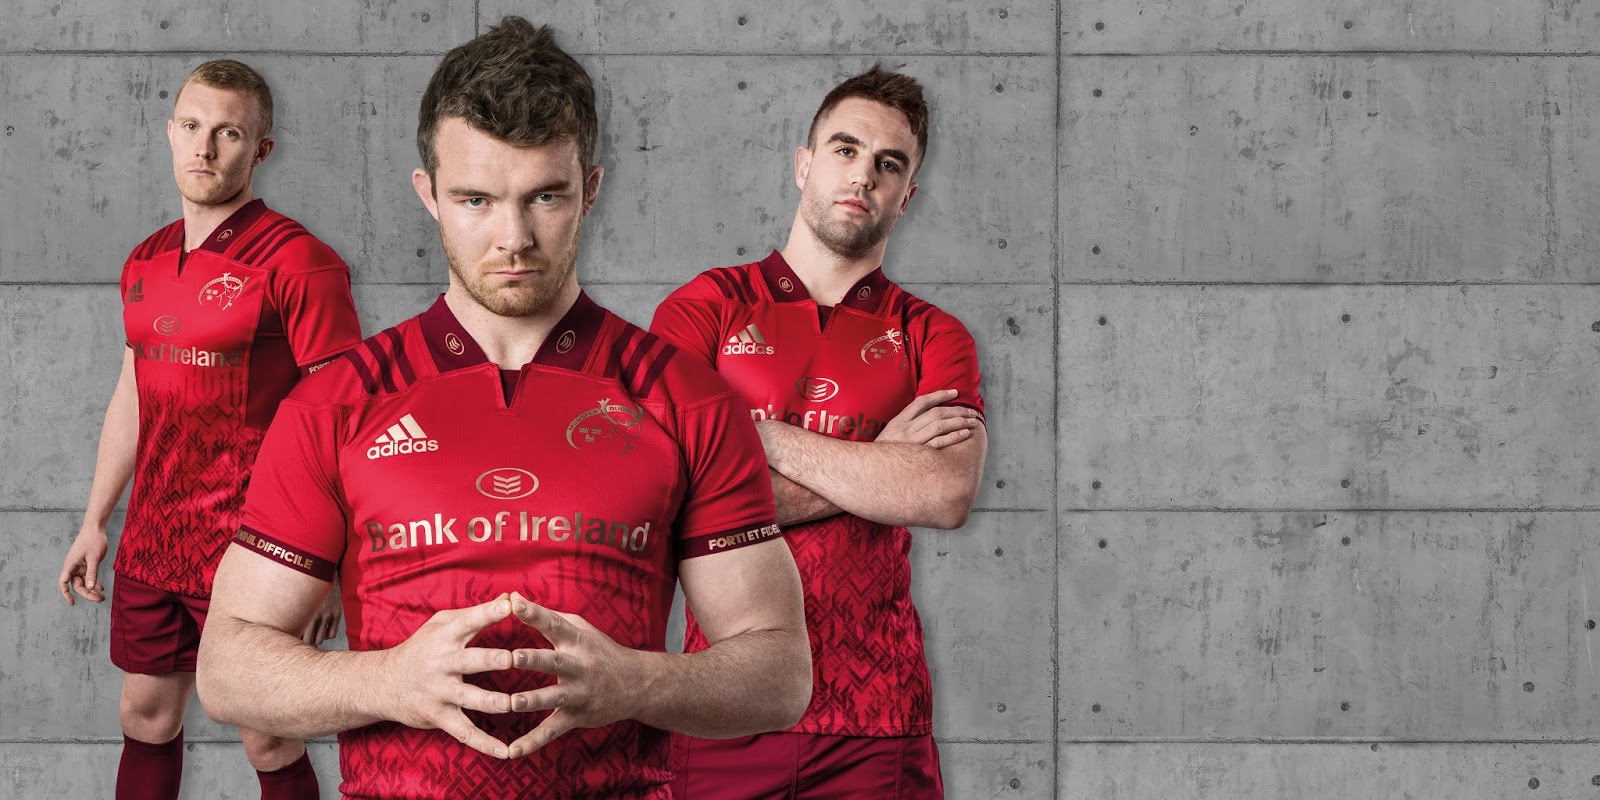 HARPIN ON RUGBY adidas reveal the 2017/18 Munster Rugby home jersey and training wear range